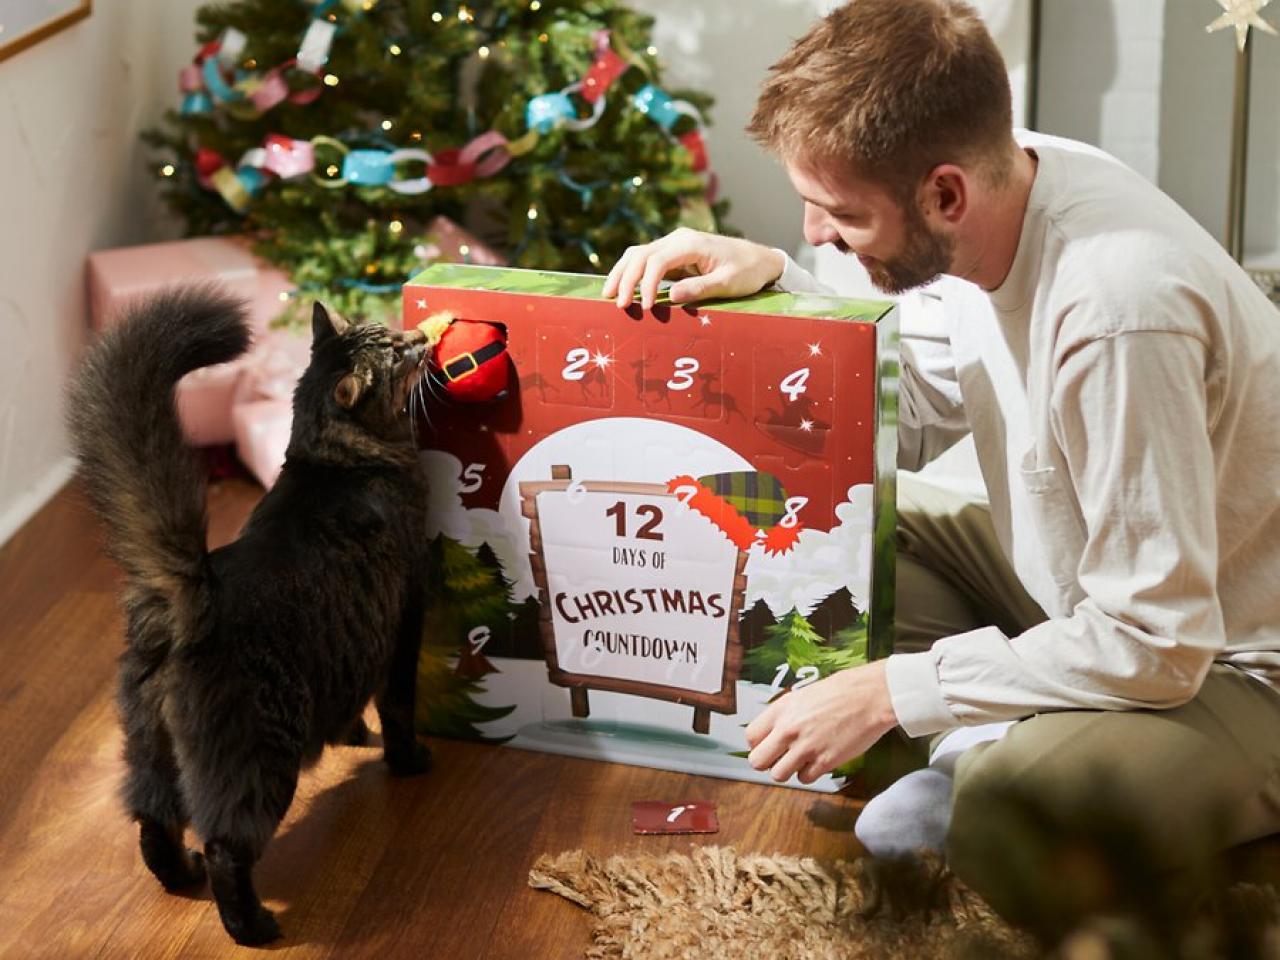 https://hgtvhome.sndimg.com/content/dam/images/hgtv/products/2021/11/15/rx_chewy_frisco-holiday-12-days-of-christmas-cardboard-advent-calendar-with-cat-toys.jpeg.rend.hgtvcom.1280.960.suffix/1636996006229.jpeg